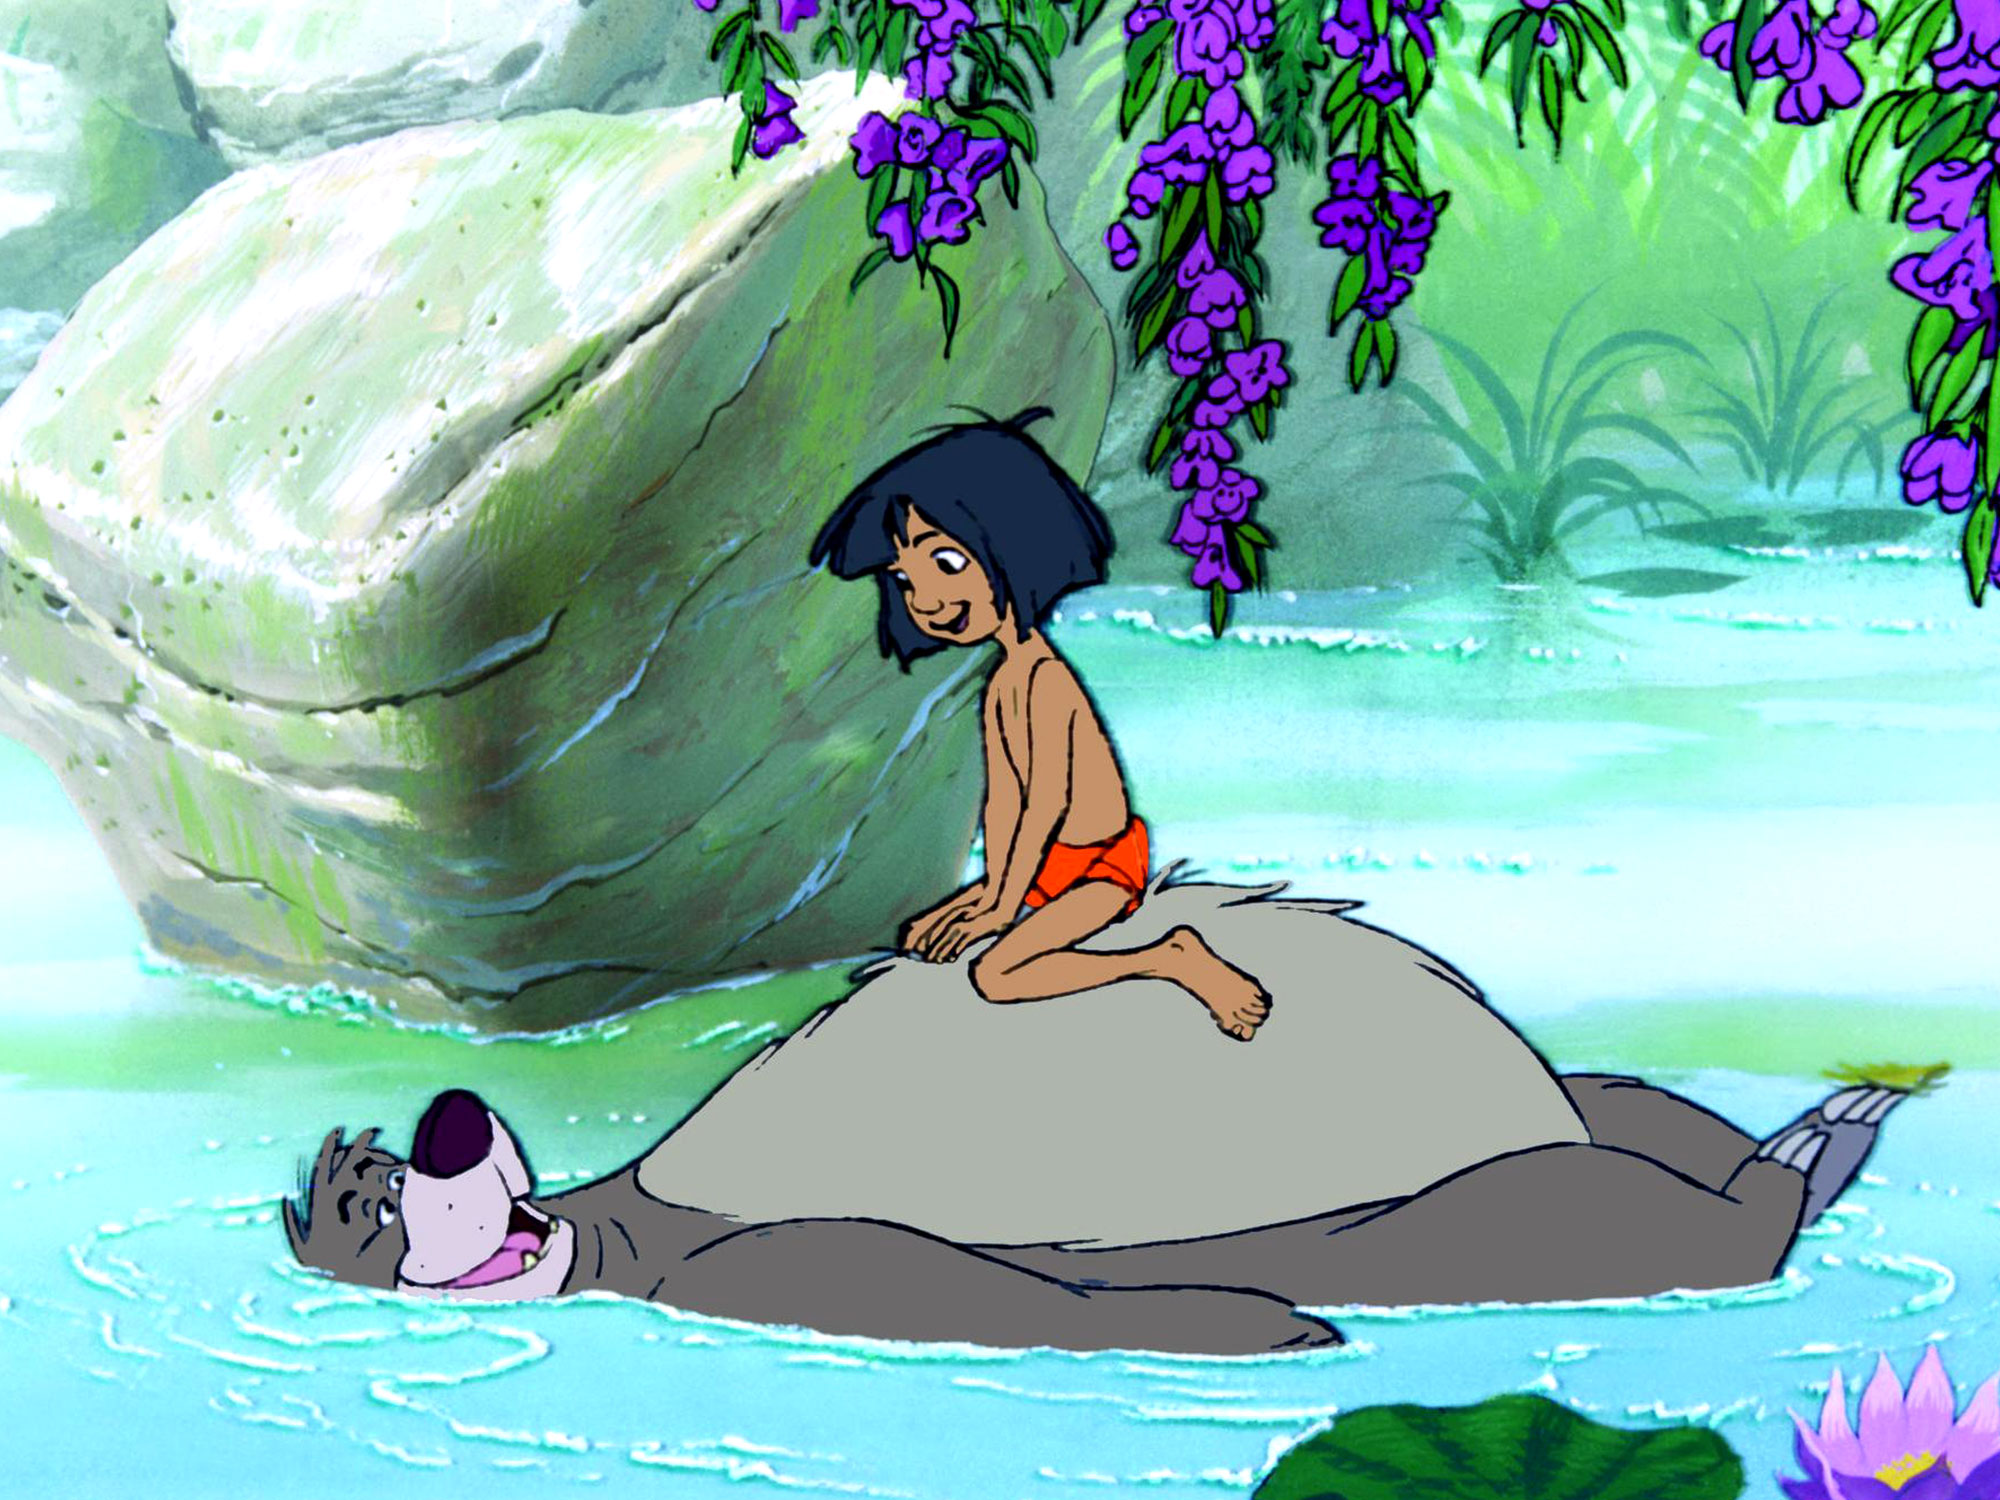 Why Disney's 1967 The Jungle Book continues to inspire - Little White Lies